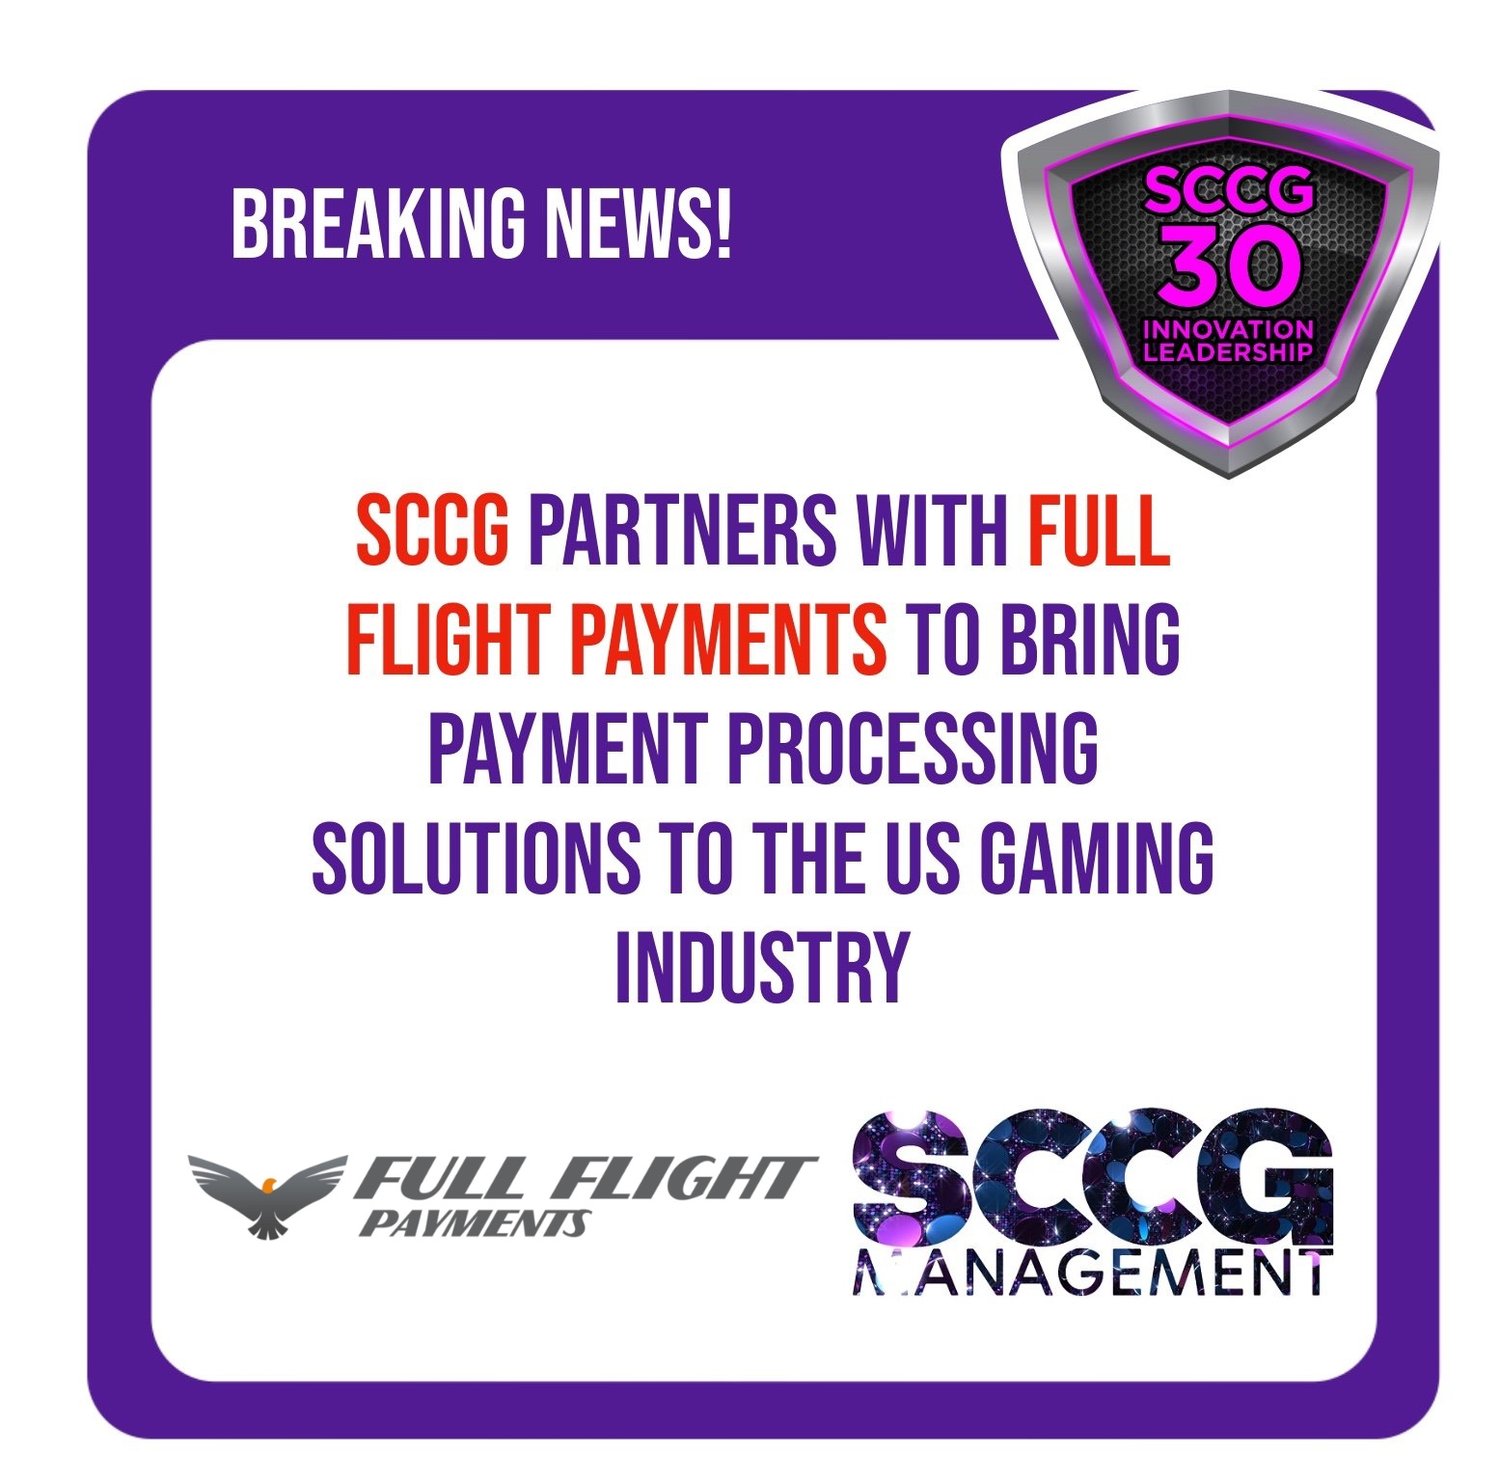 SCCG announces strategic partnership with Full Flight Payments